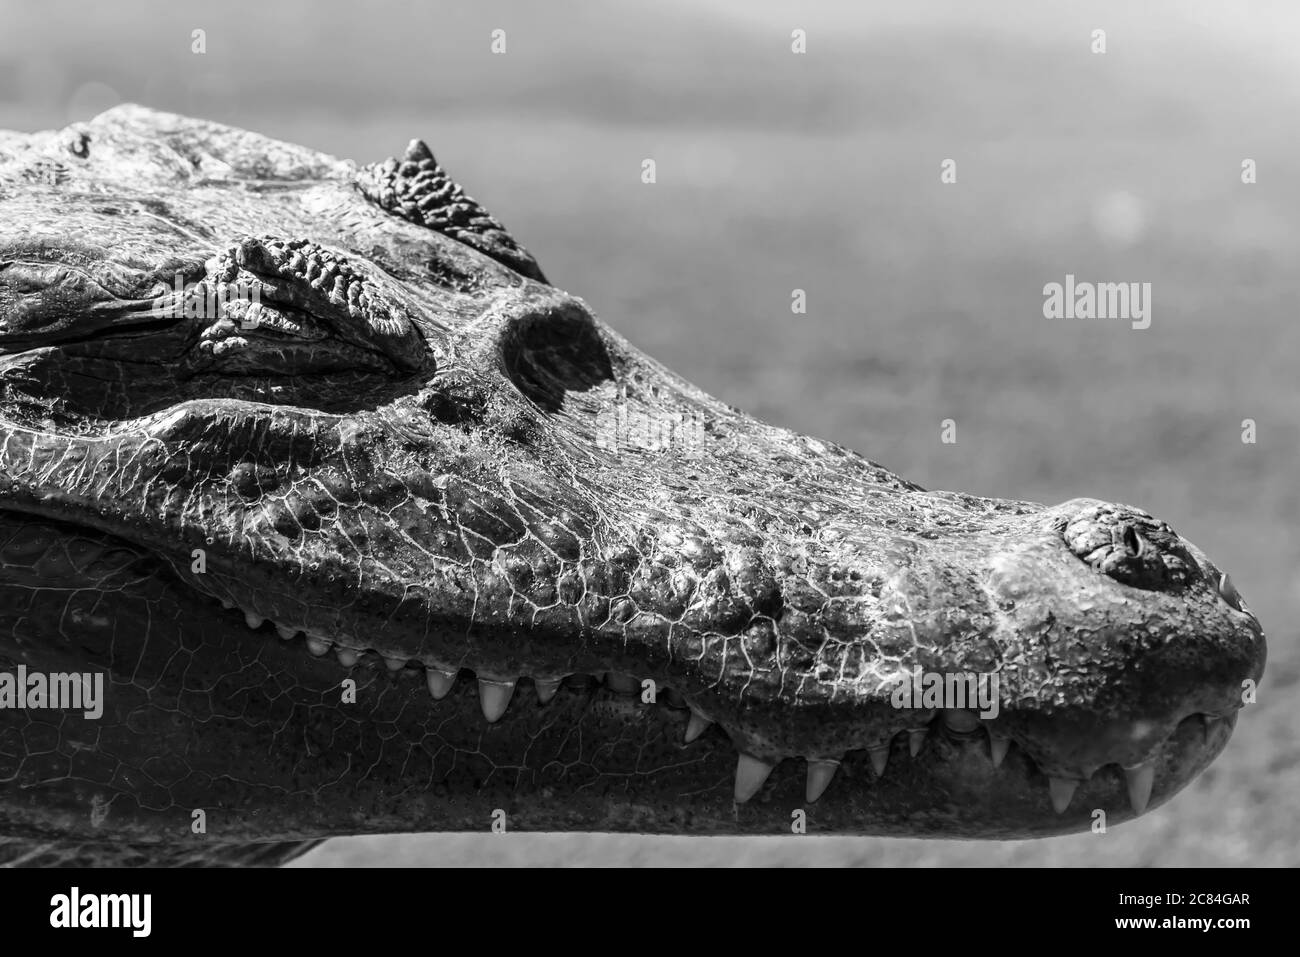 Black and white photo in close-up on alligator´s face Stock Photo